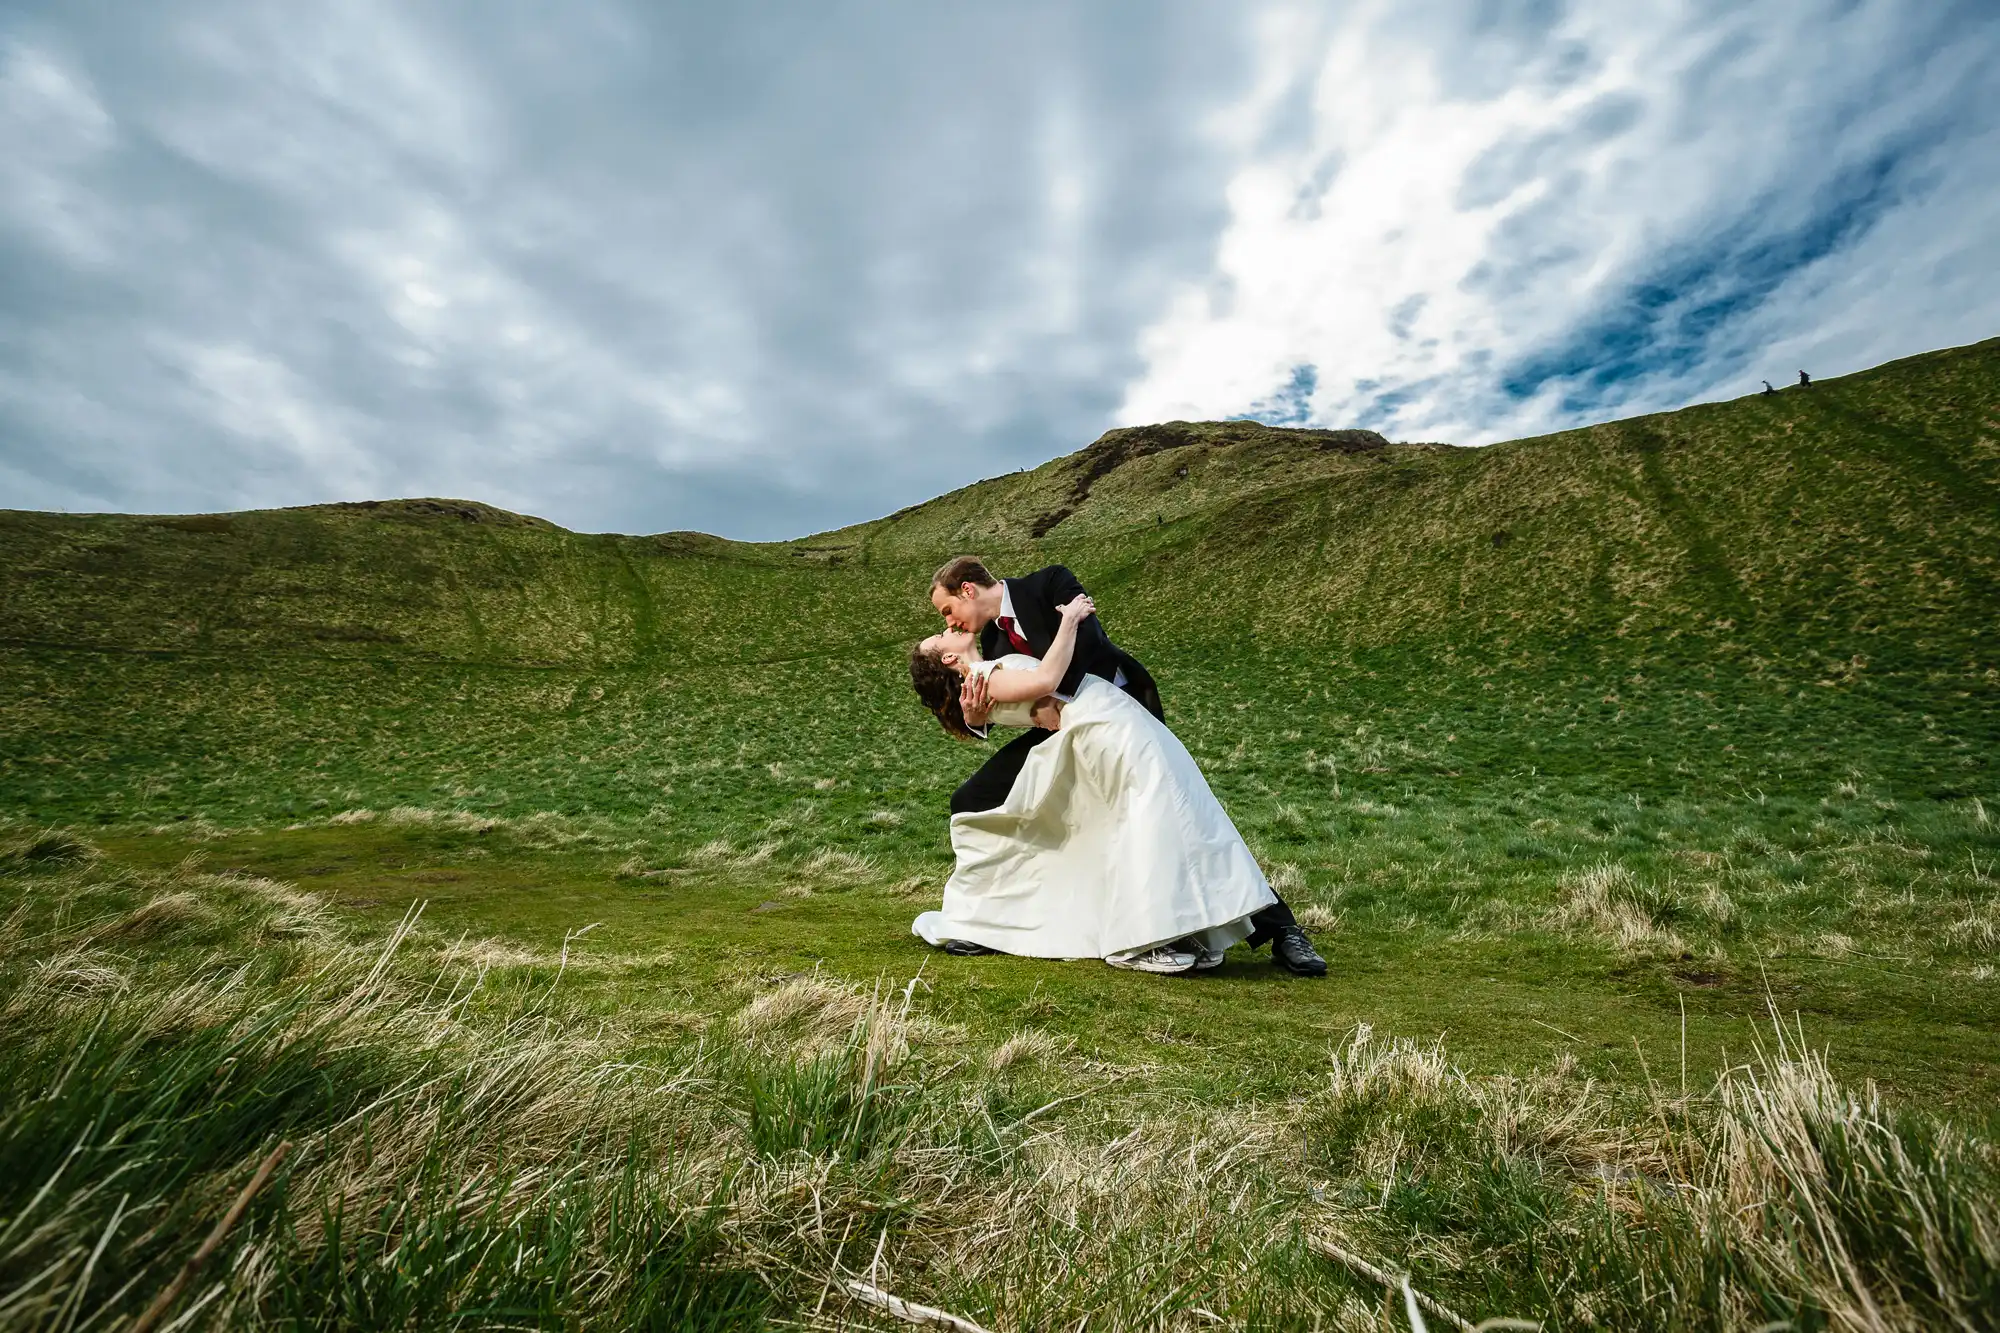 A couple in wedding attire dancing in a lush green field under a dramatic cloudy sky.